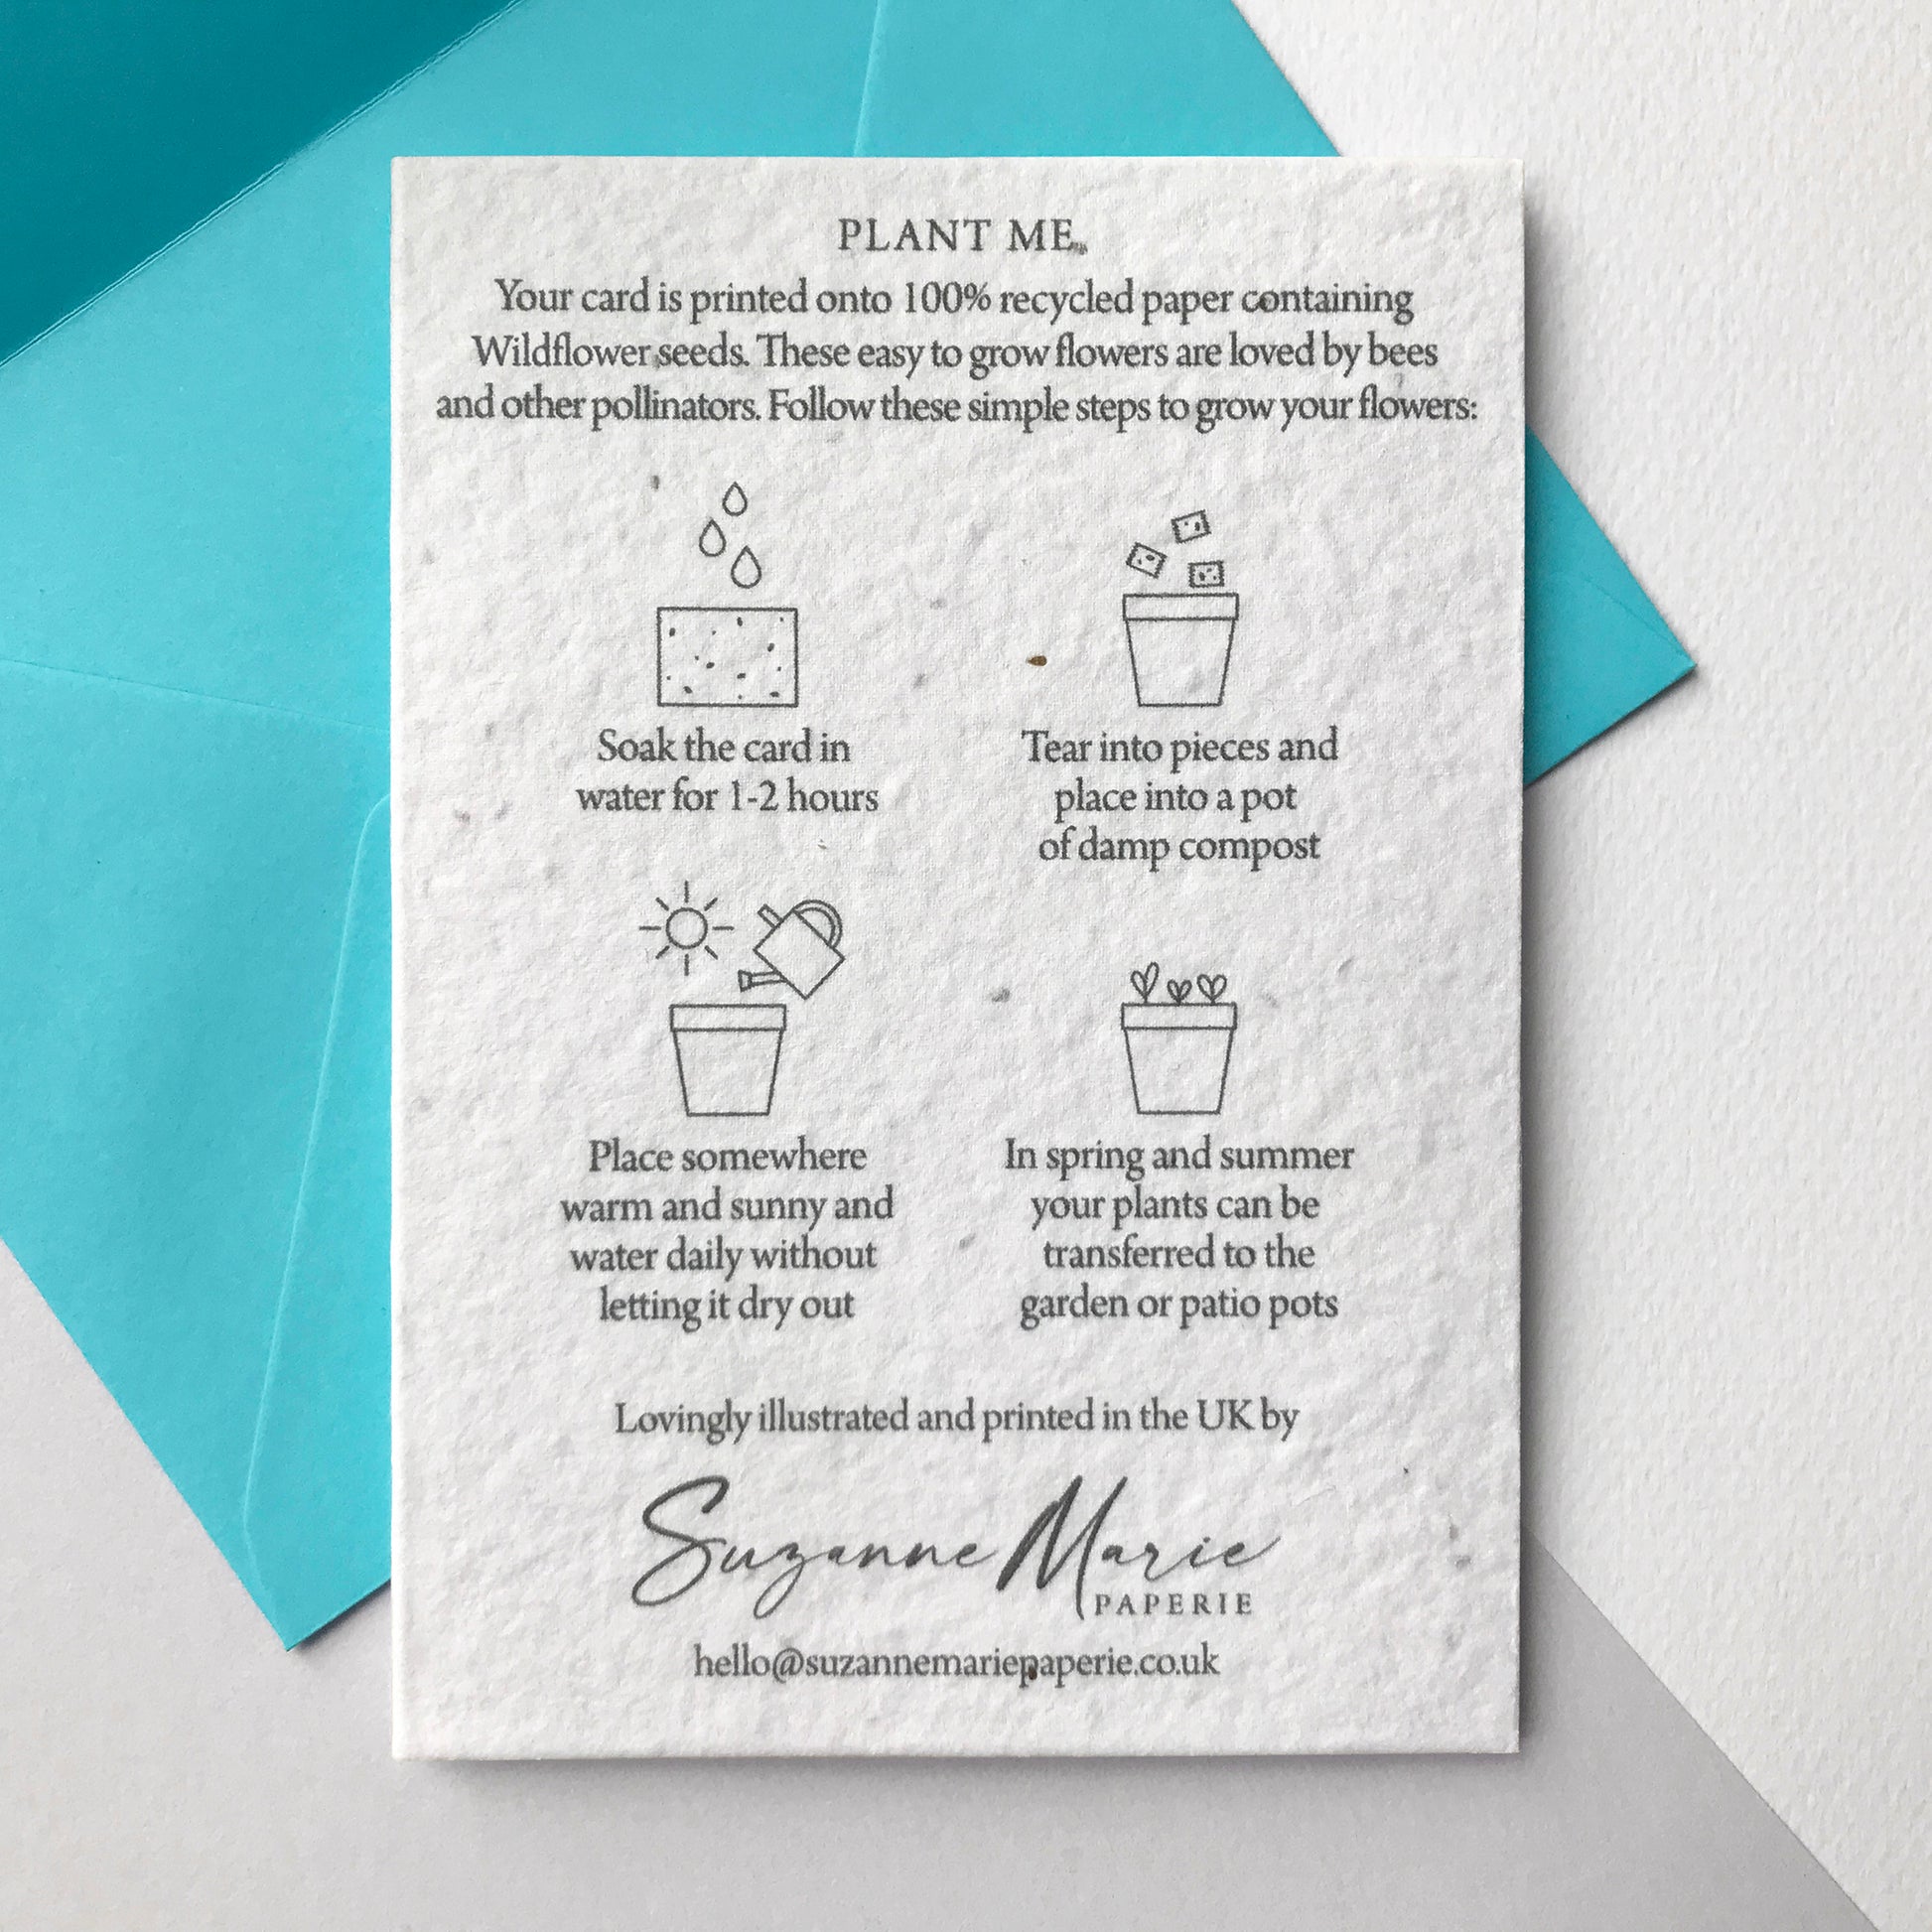 Image shows the back of the Bloom Cards plantable seed paper wedding congratulations card featuring easy to follow planting instructions by Suzanne Marie Paperie.